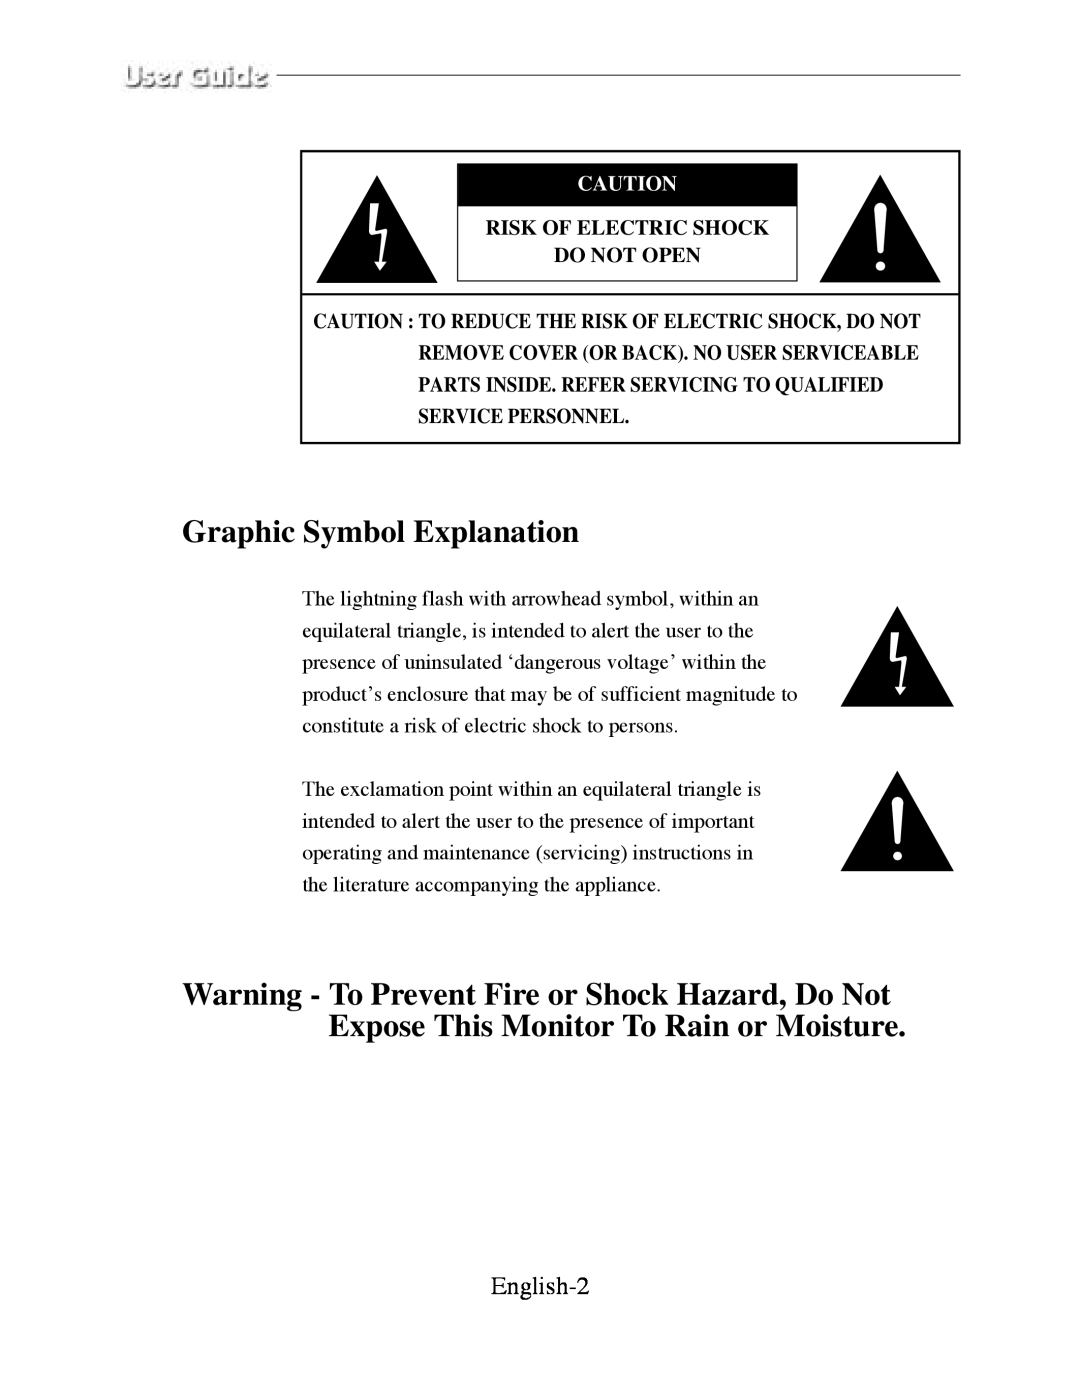 Samsung SMT-170P manual English-2, Graphic Symbol Explanation, Risk Of Electric Shock Do Not Open 